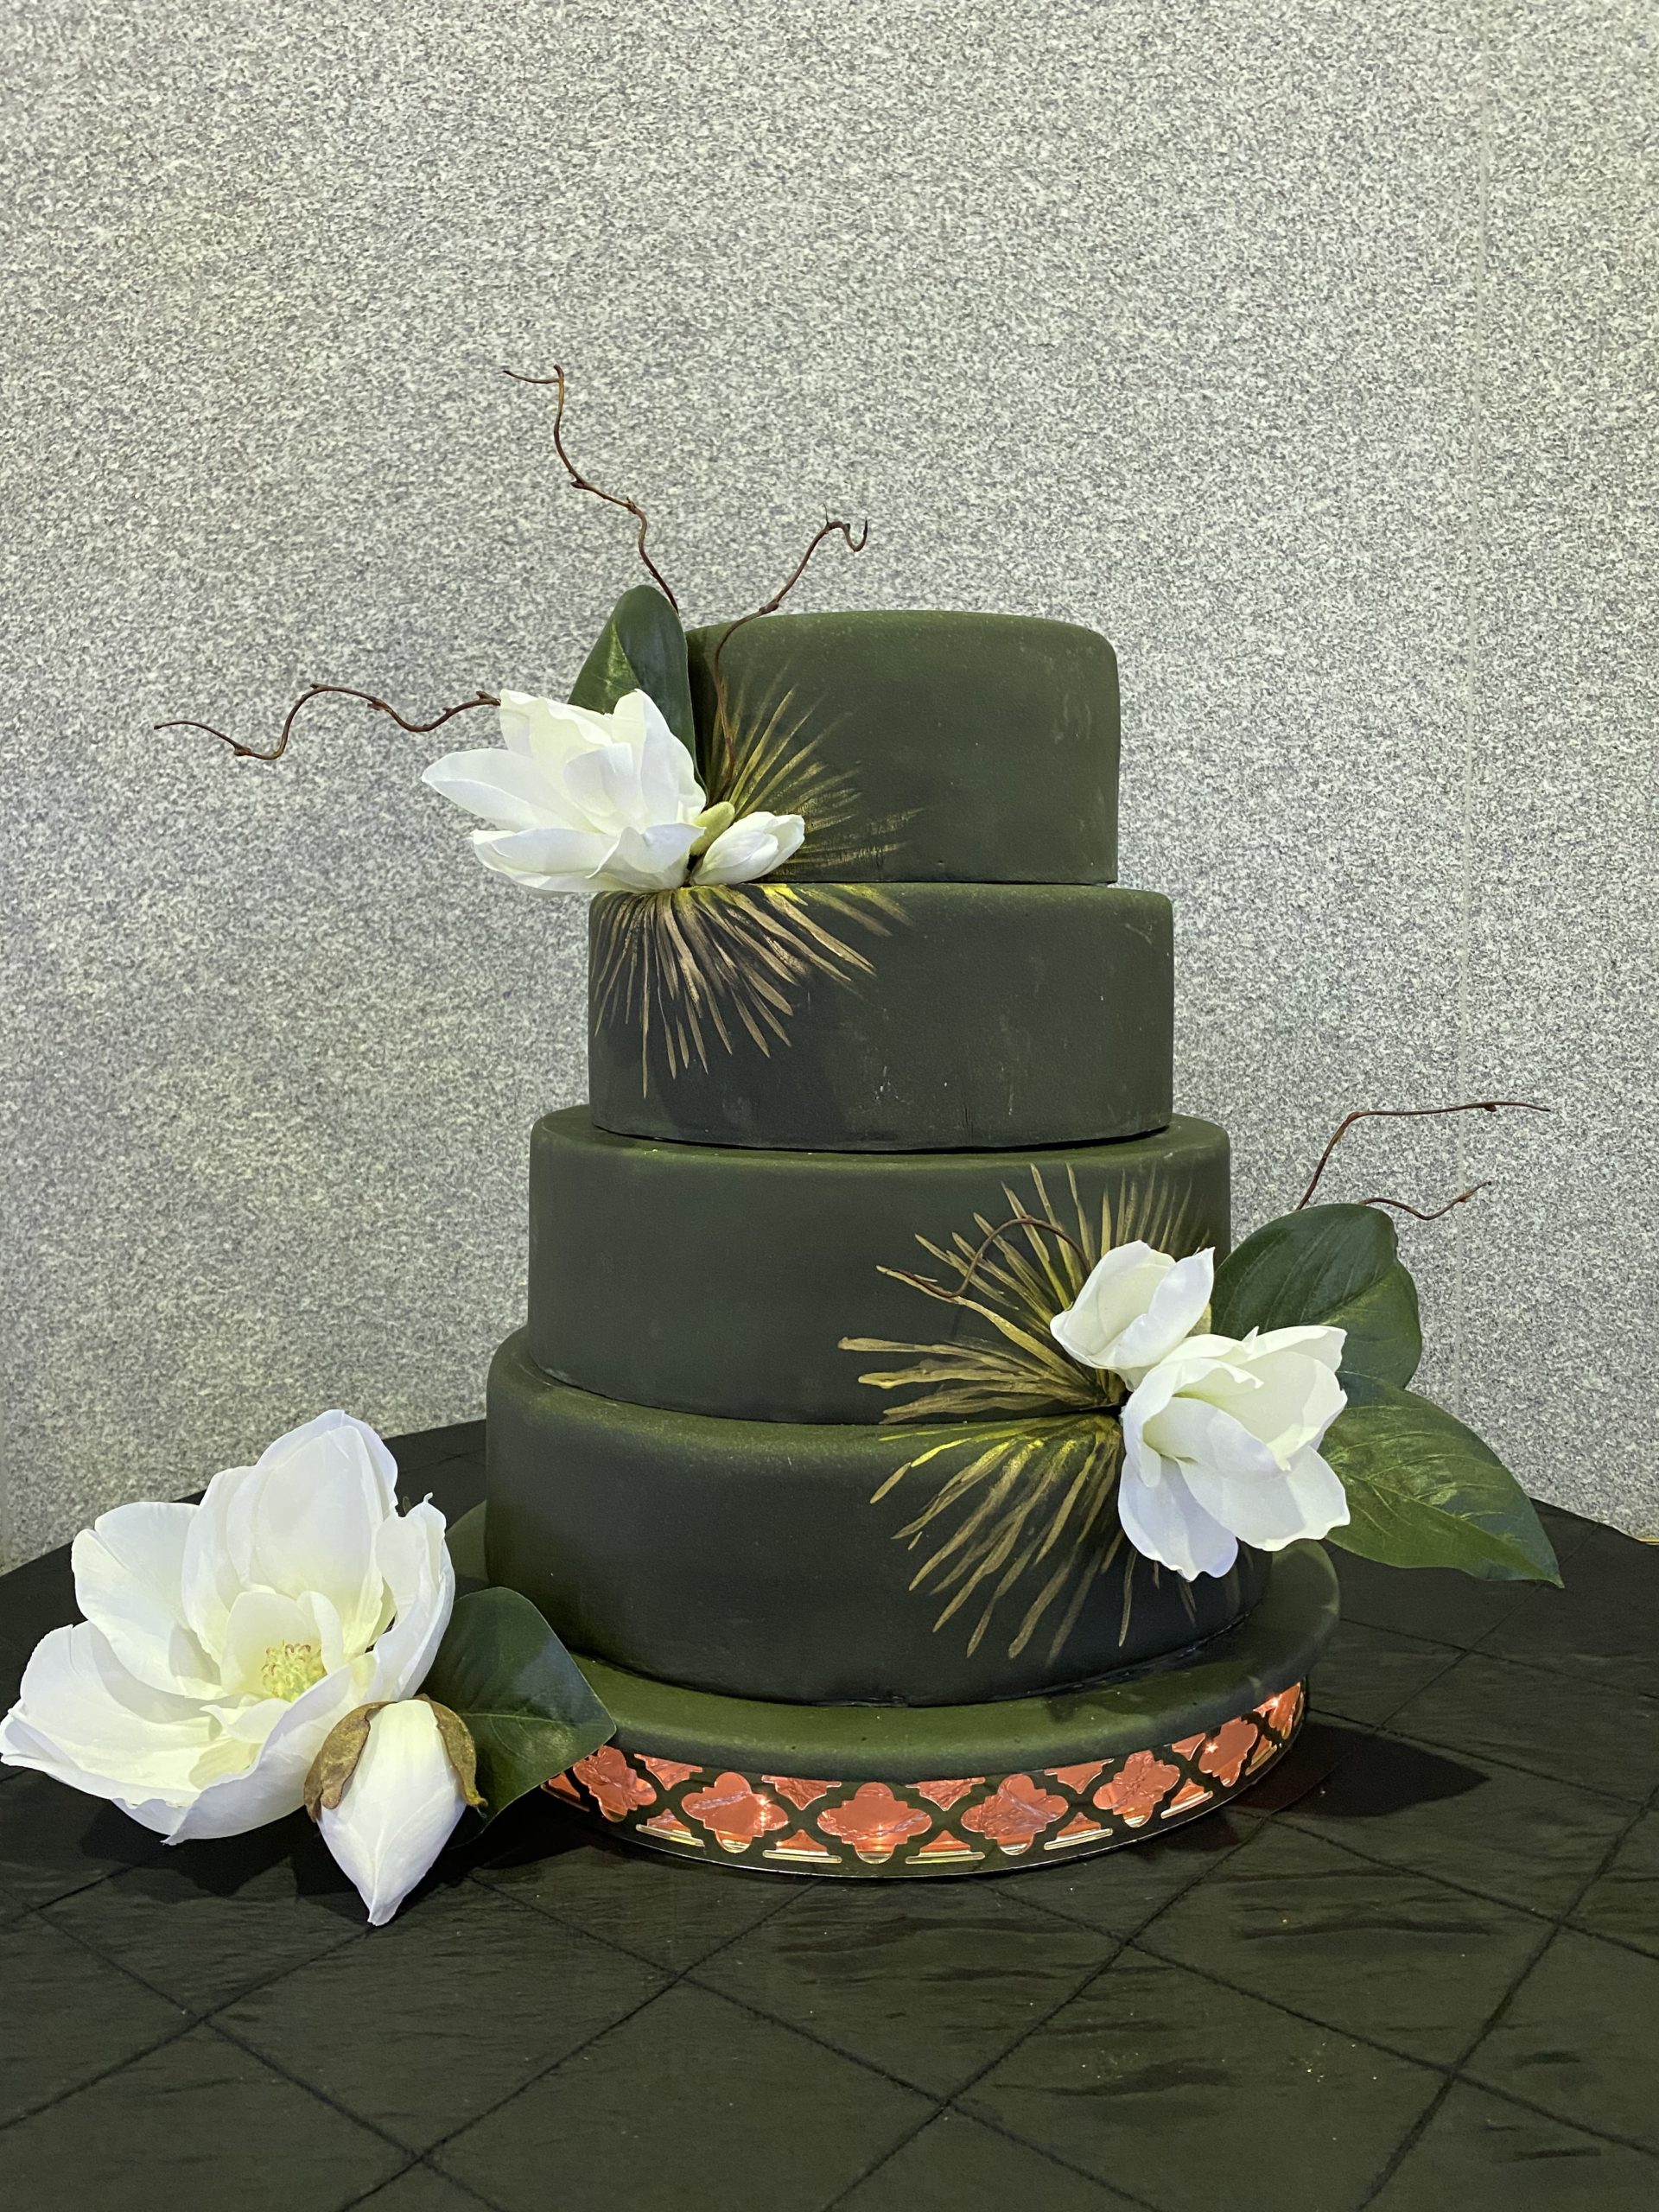 A beautiful 4-tier custom wedding cake with painted fondant and live flowers from Village Patisserie in Toledo, Ohio